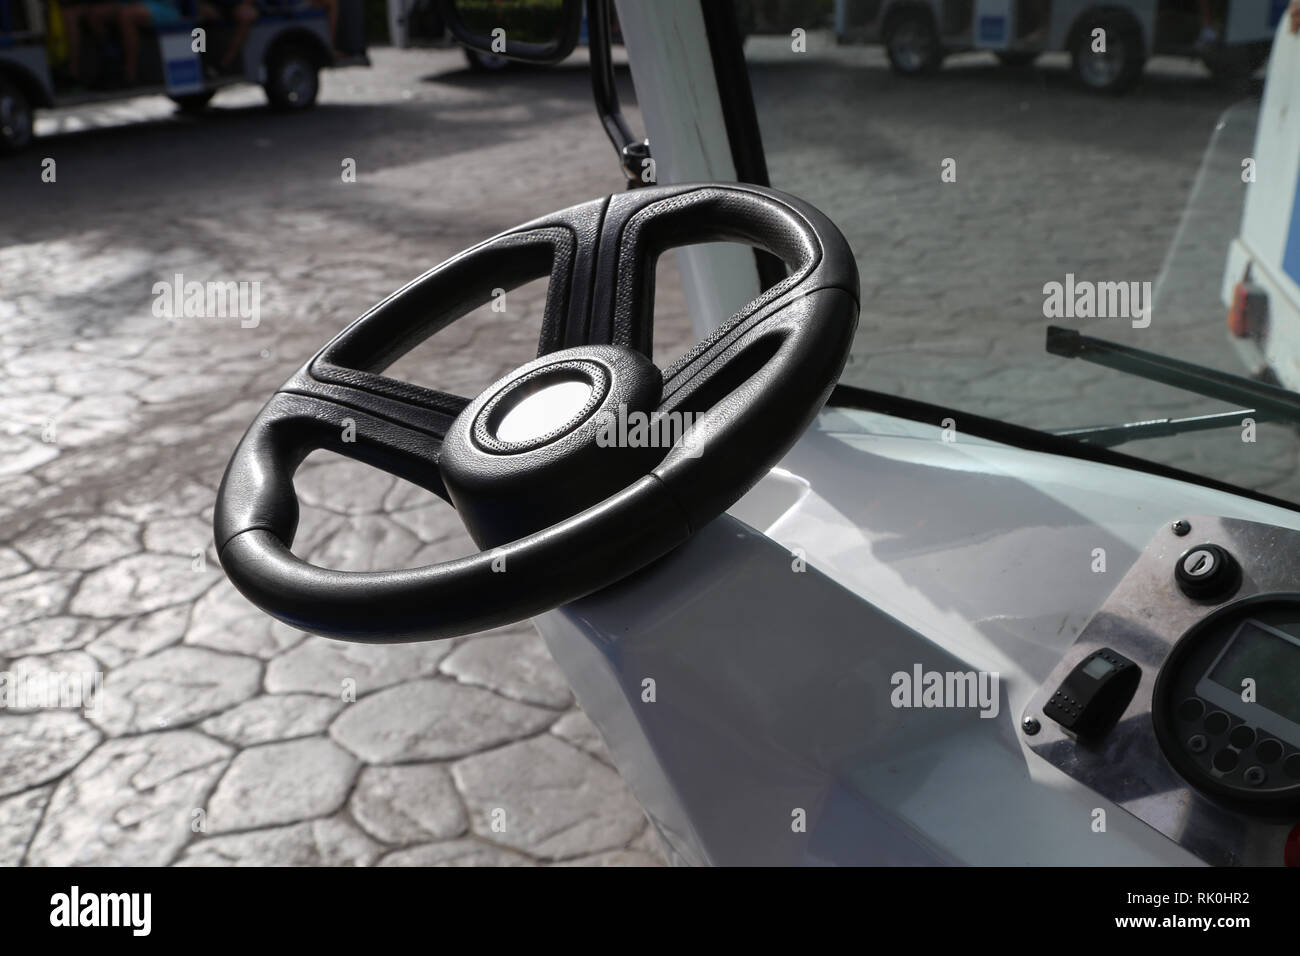 The rudder of a small electric car Stock Photo